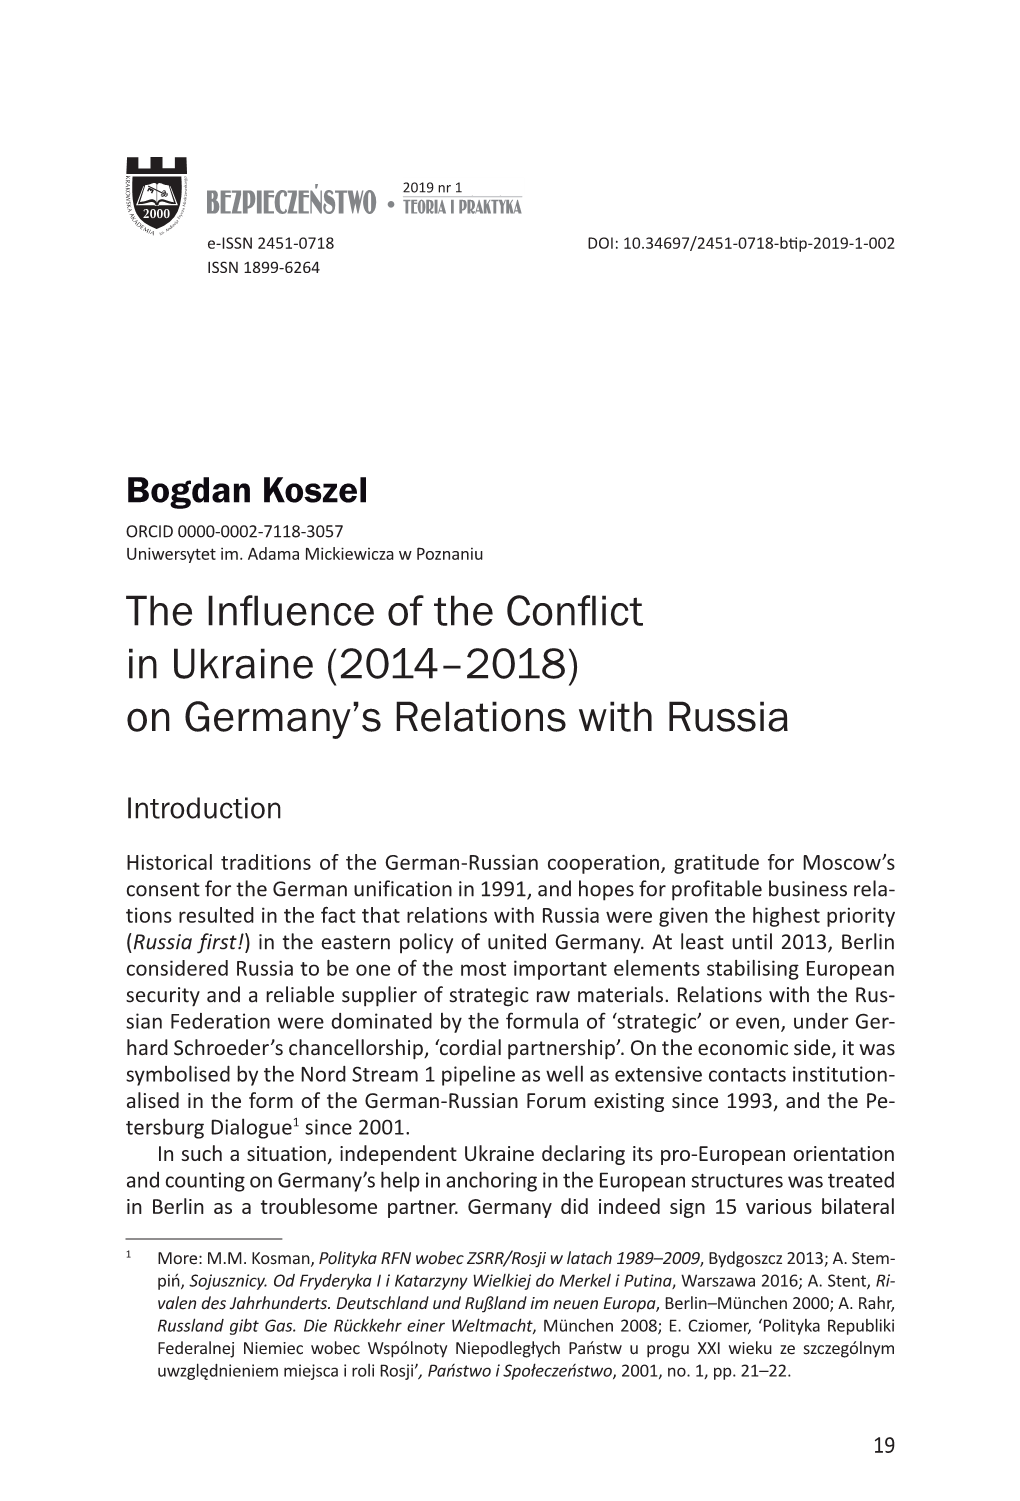 The Influence of the Conflict in Ukraine (2014–2018) on Germany's